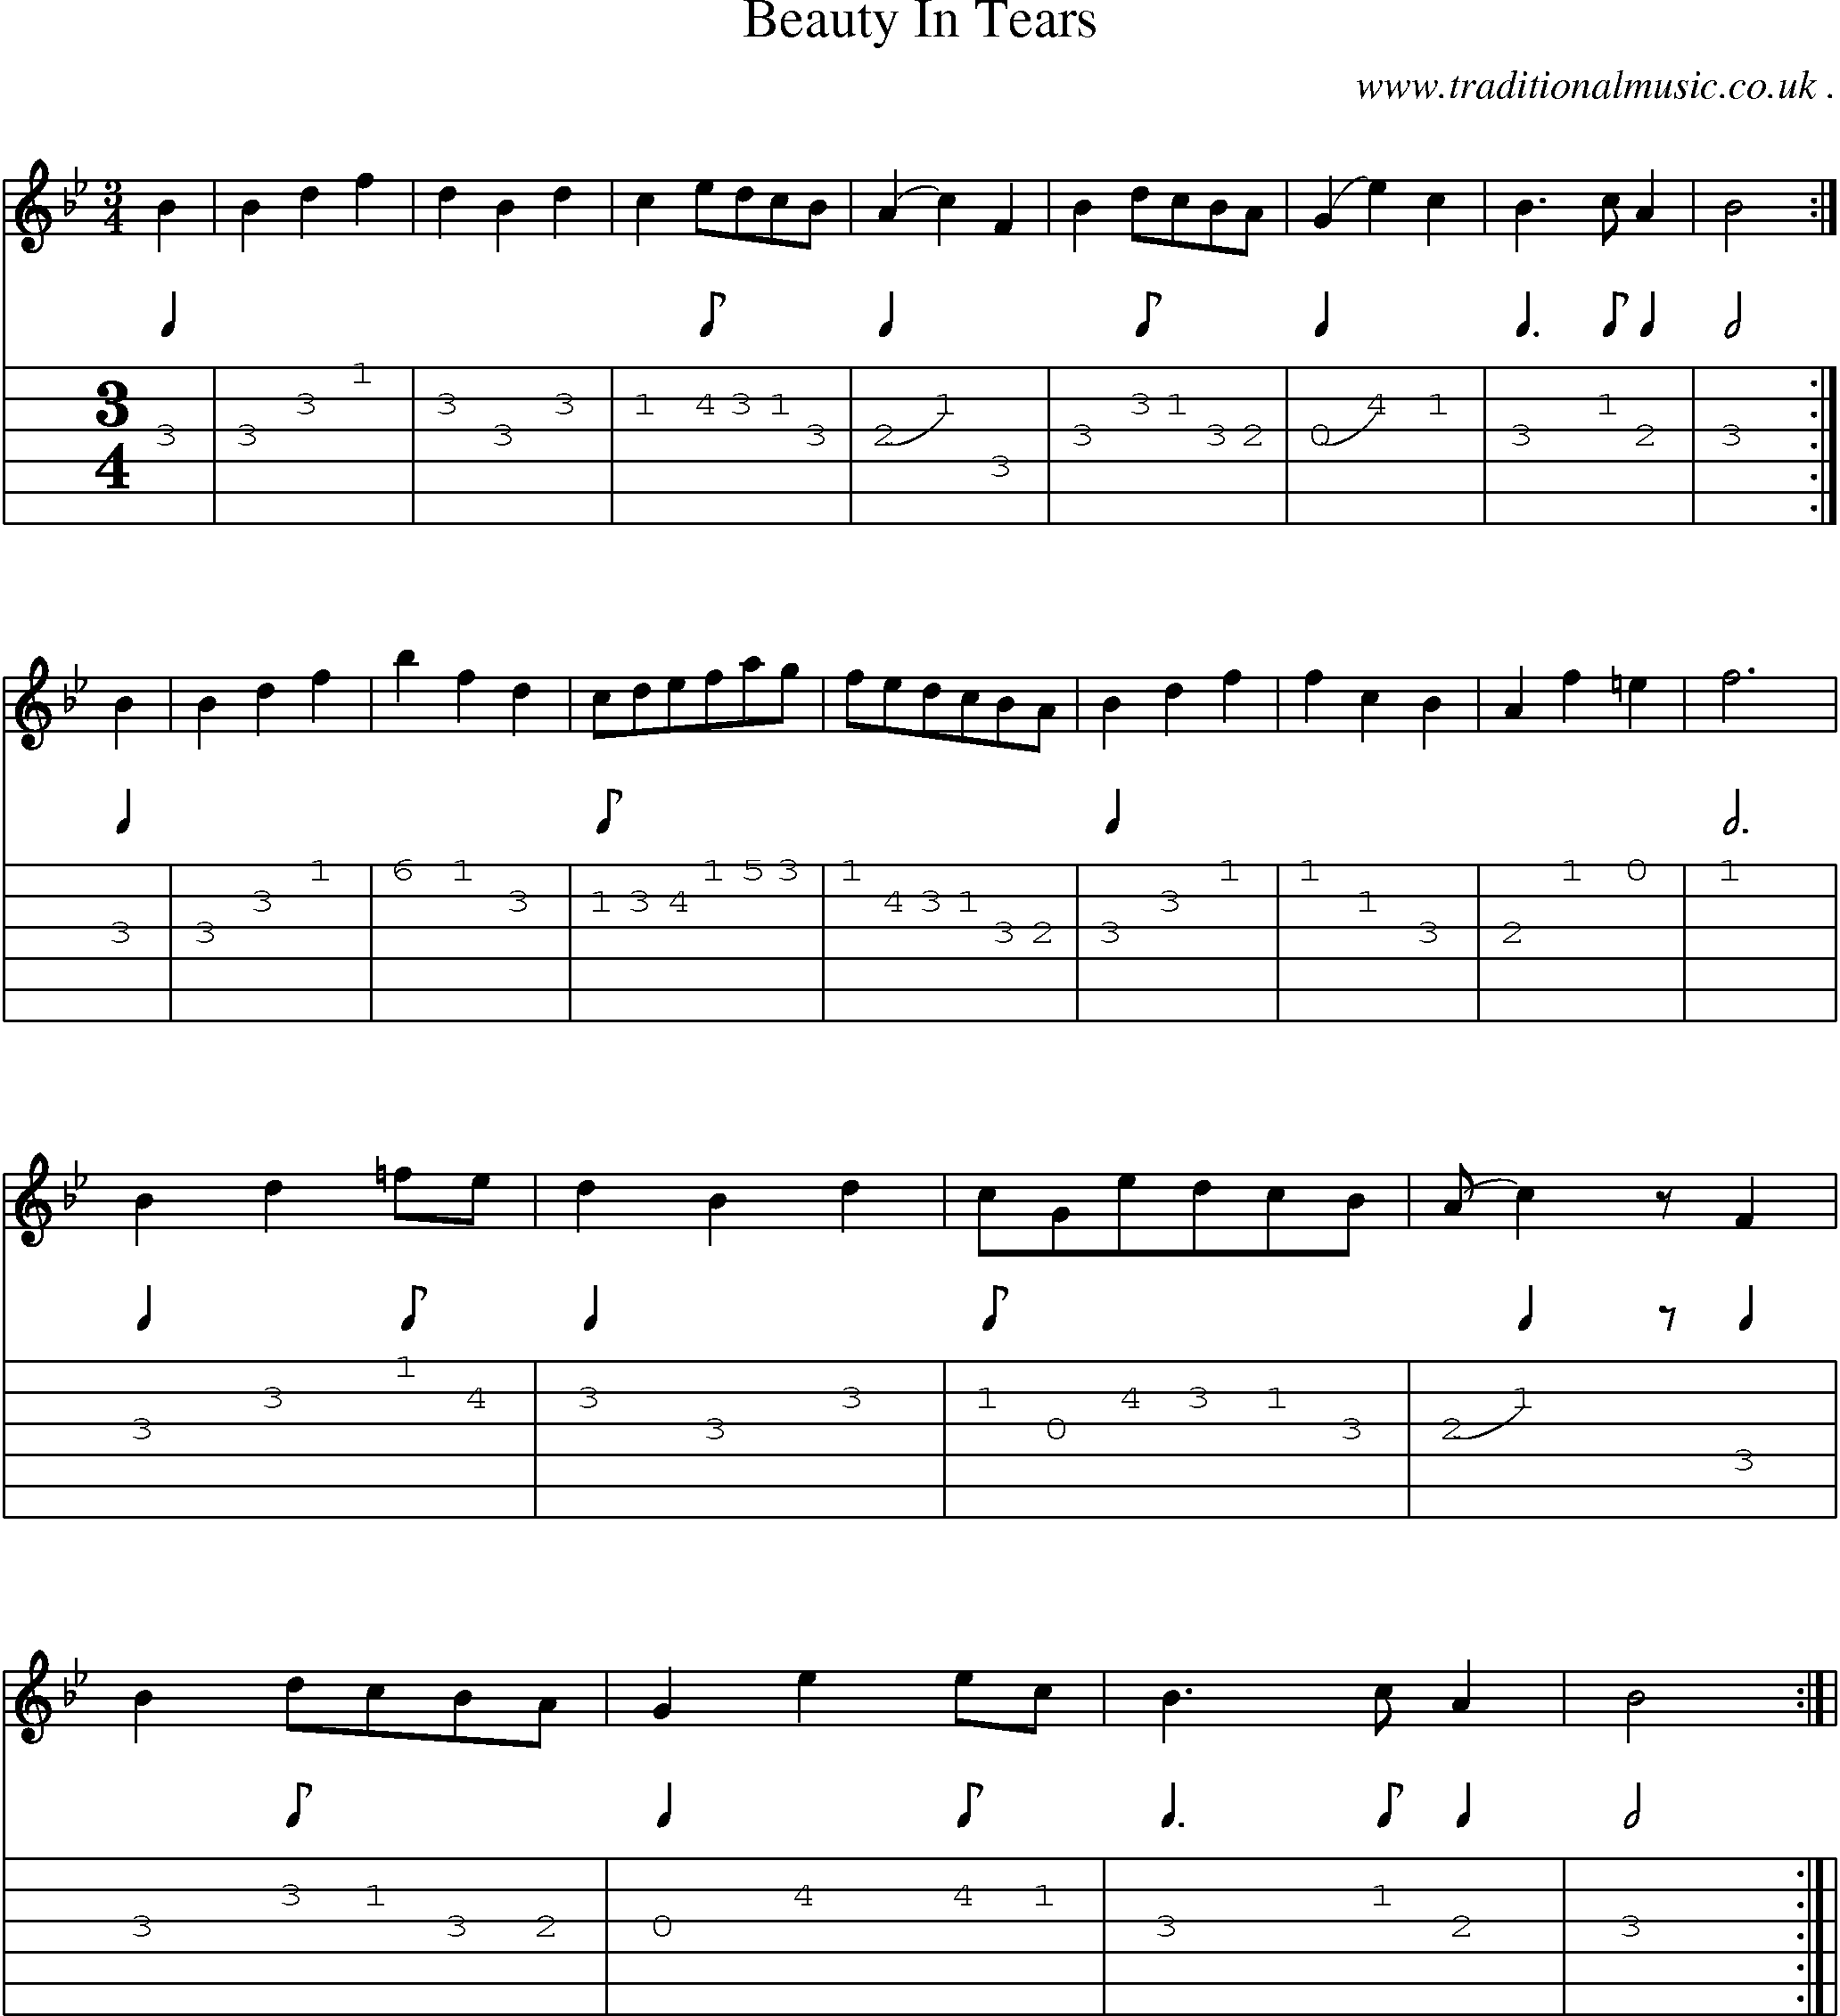 Sheet-Music and Guitar Tabs for Beauty In Tears